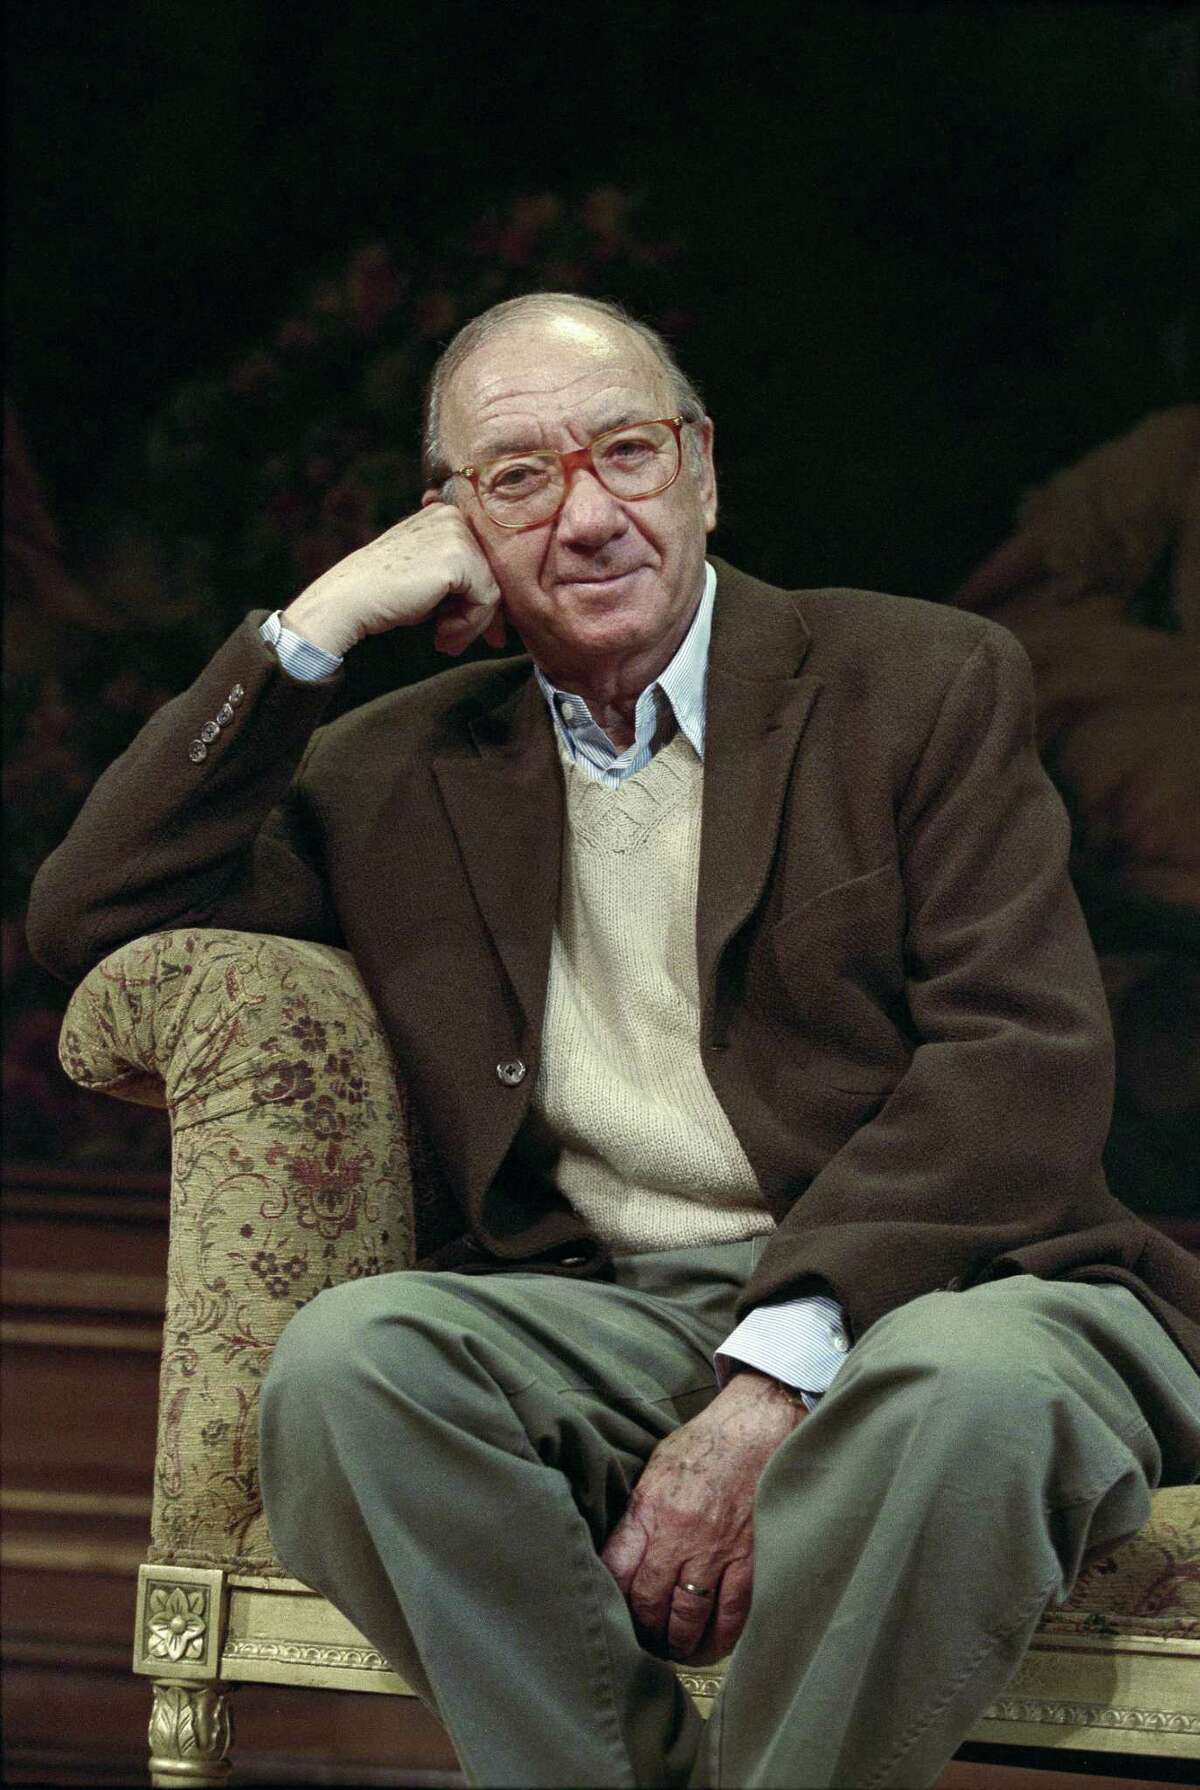 Neil Simon, who died last year, will be honored by the Sheldon Vexler Theatre with a production of his comedy “God’s Favorite.”